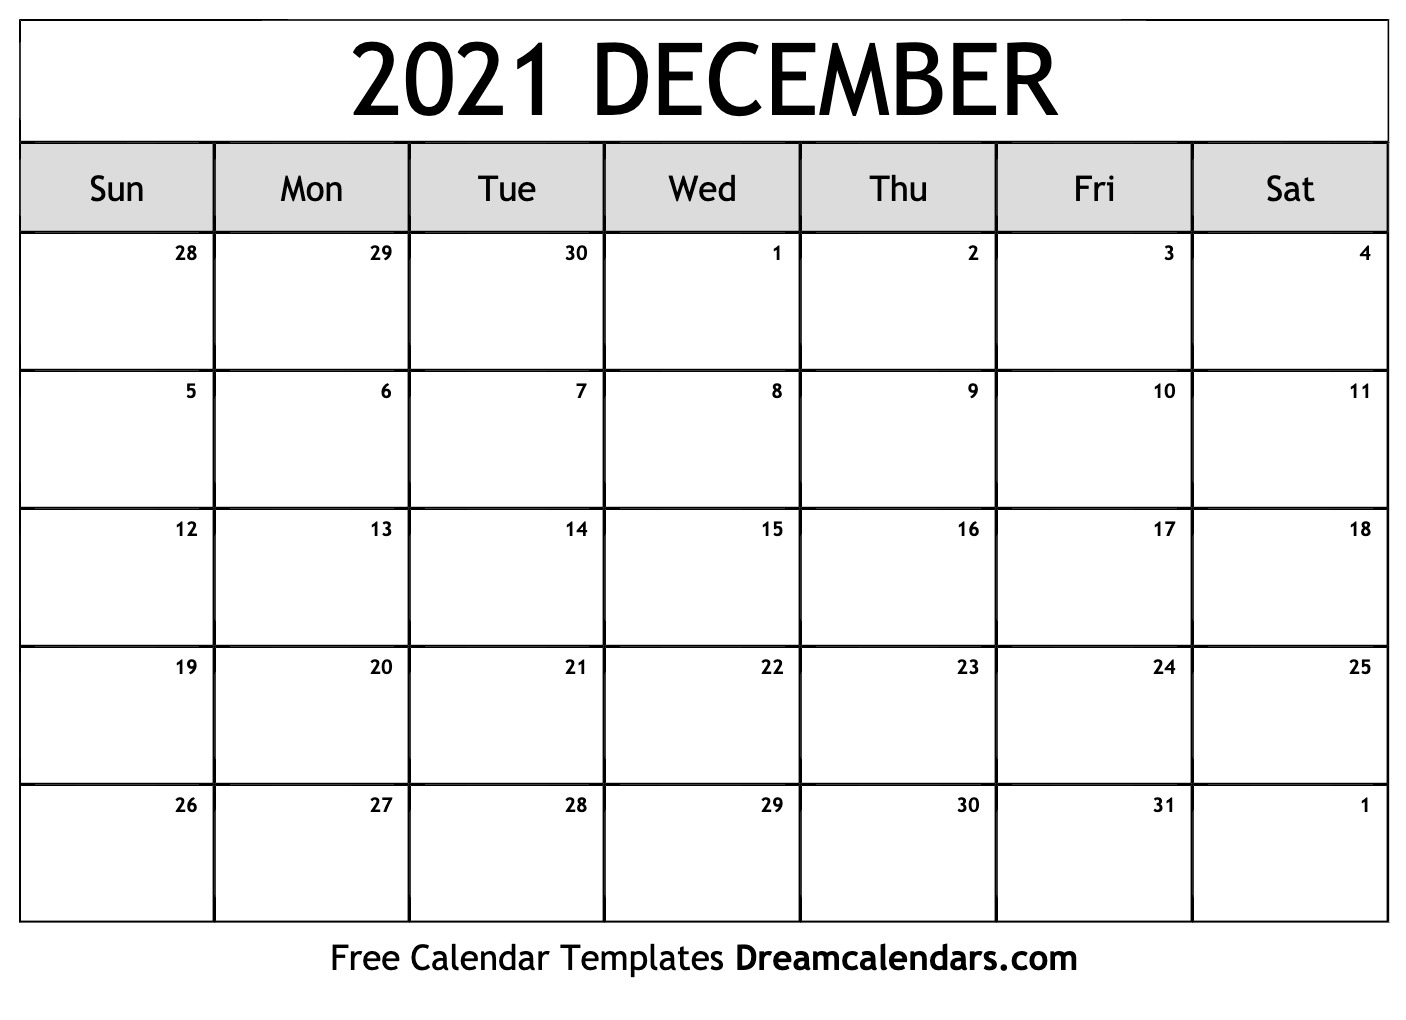 Take Decembers Calender For 2021